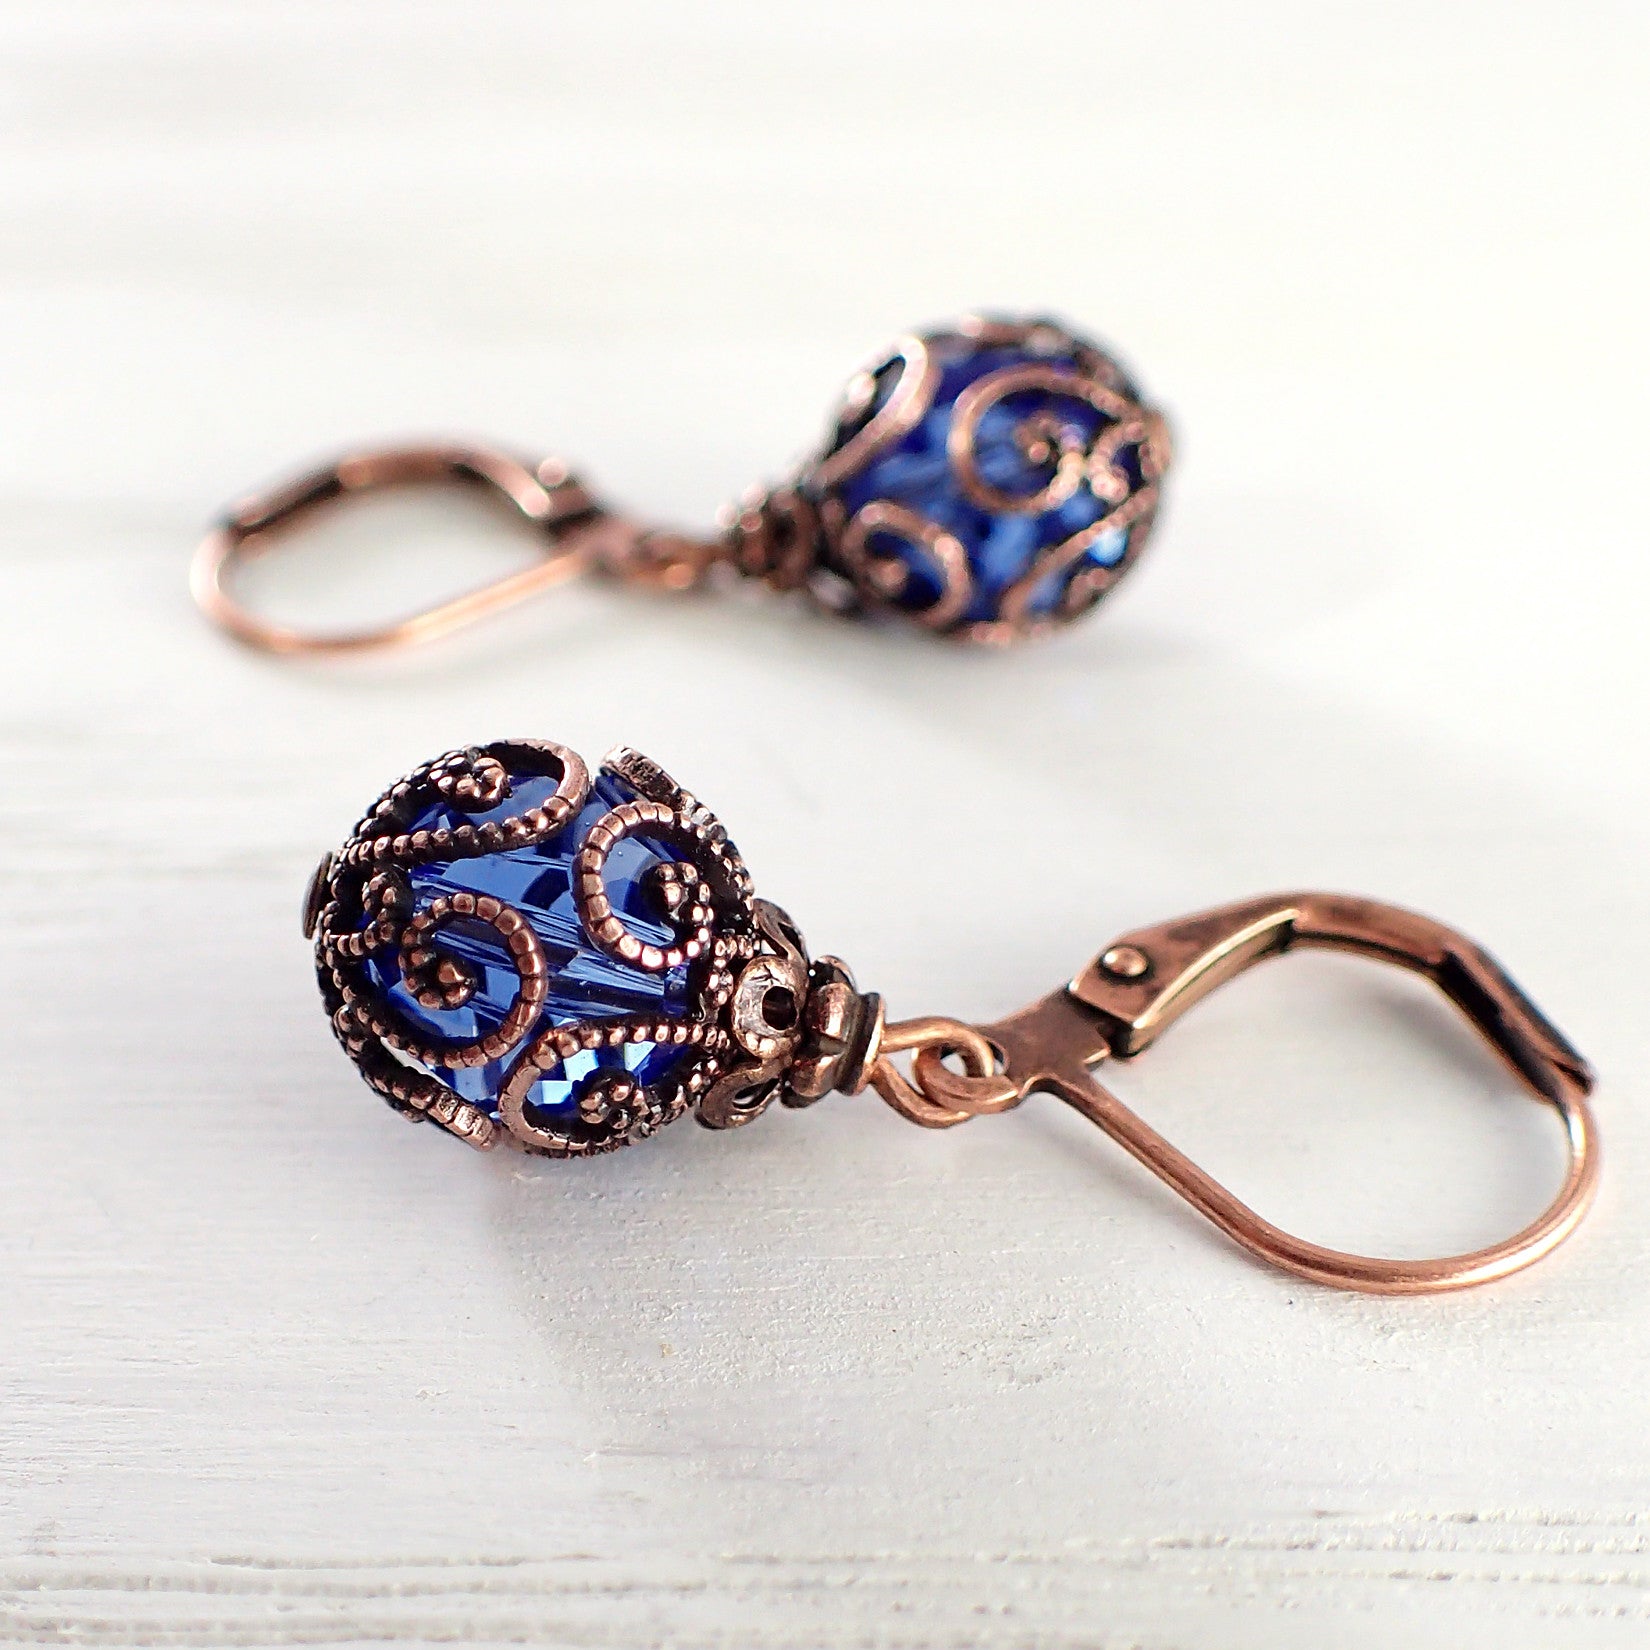 Bright Blue and Copper Caged Crystal Earrings